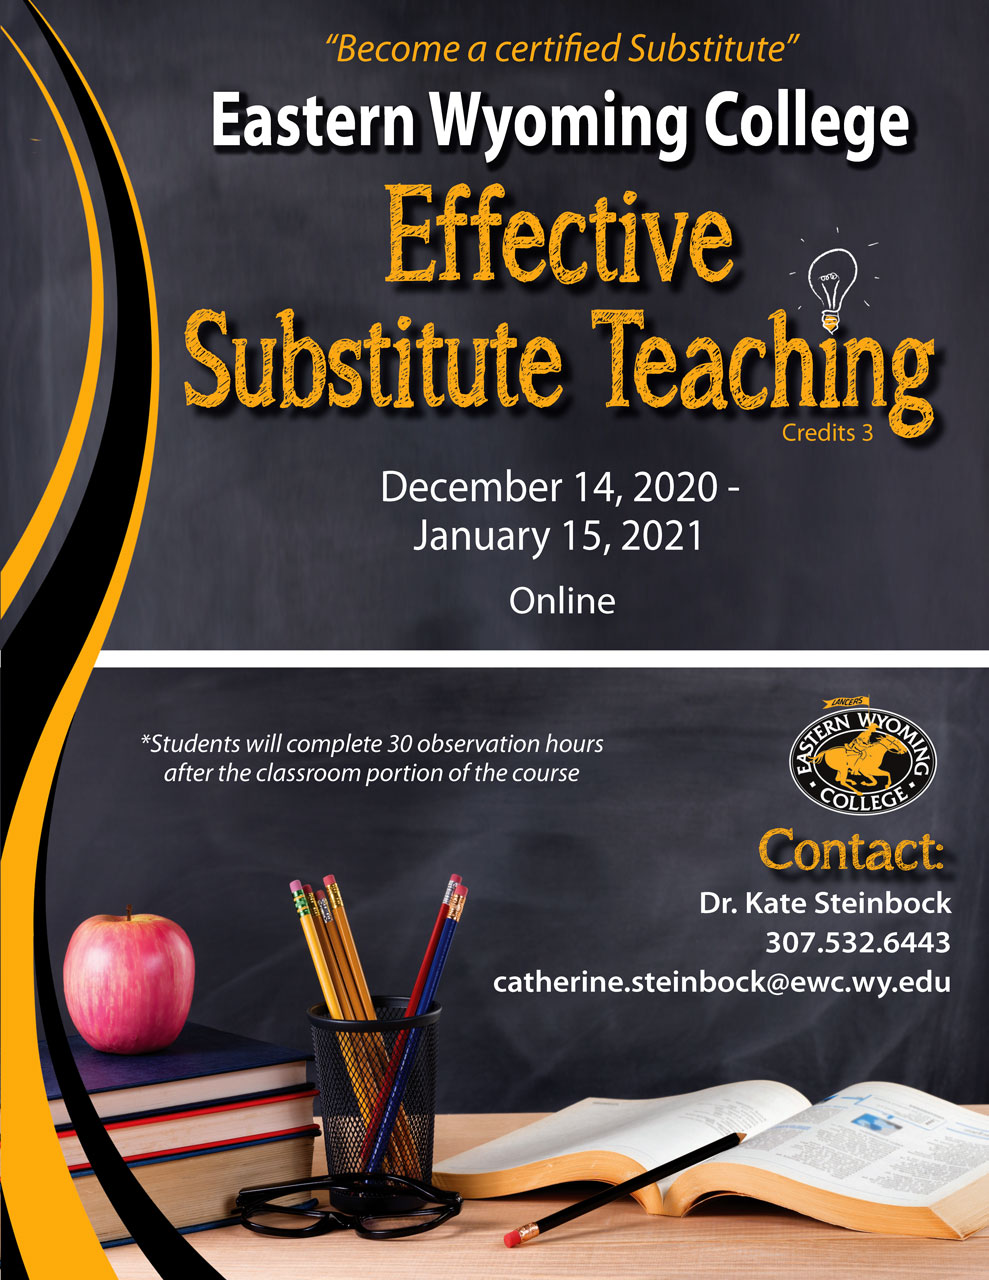 Eastern Wyoming College - Effective Substitute Teaching